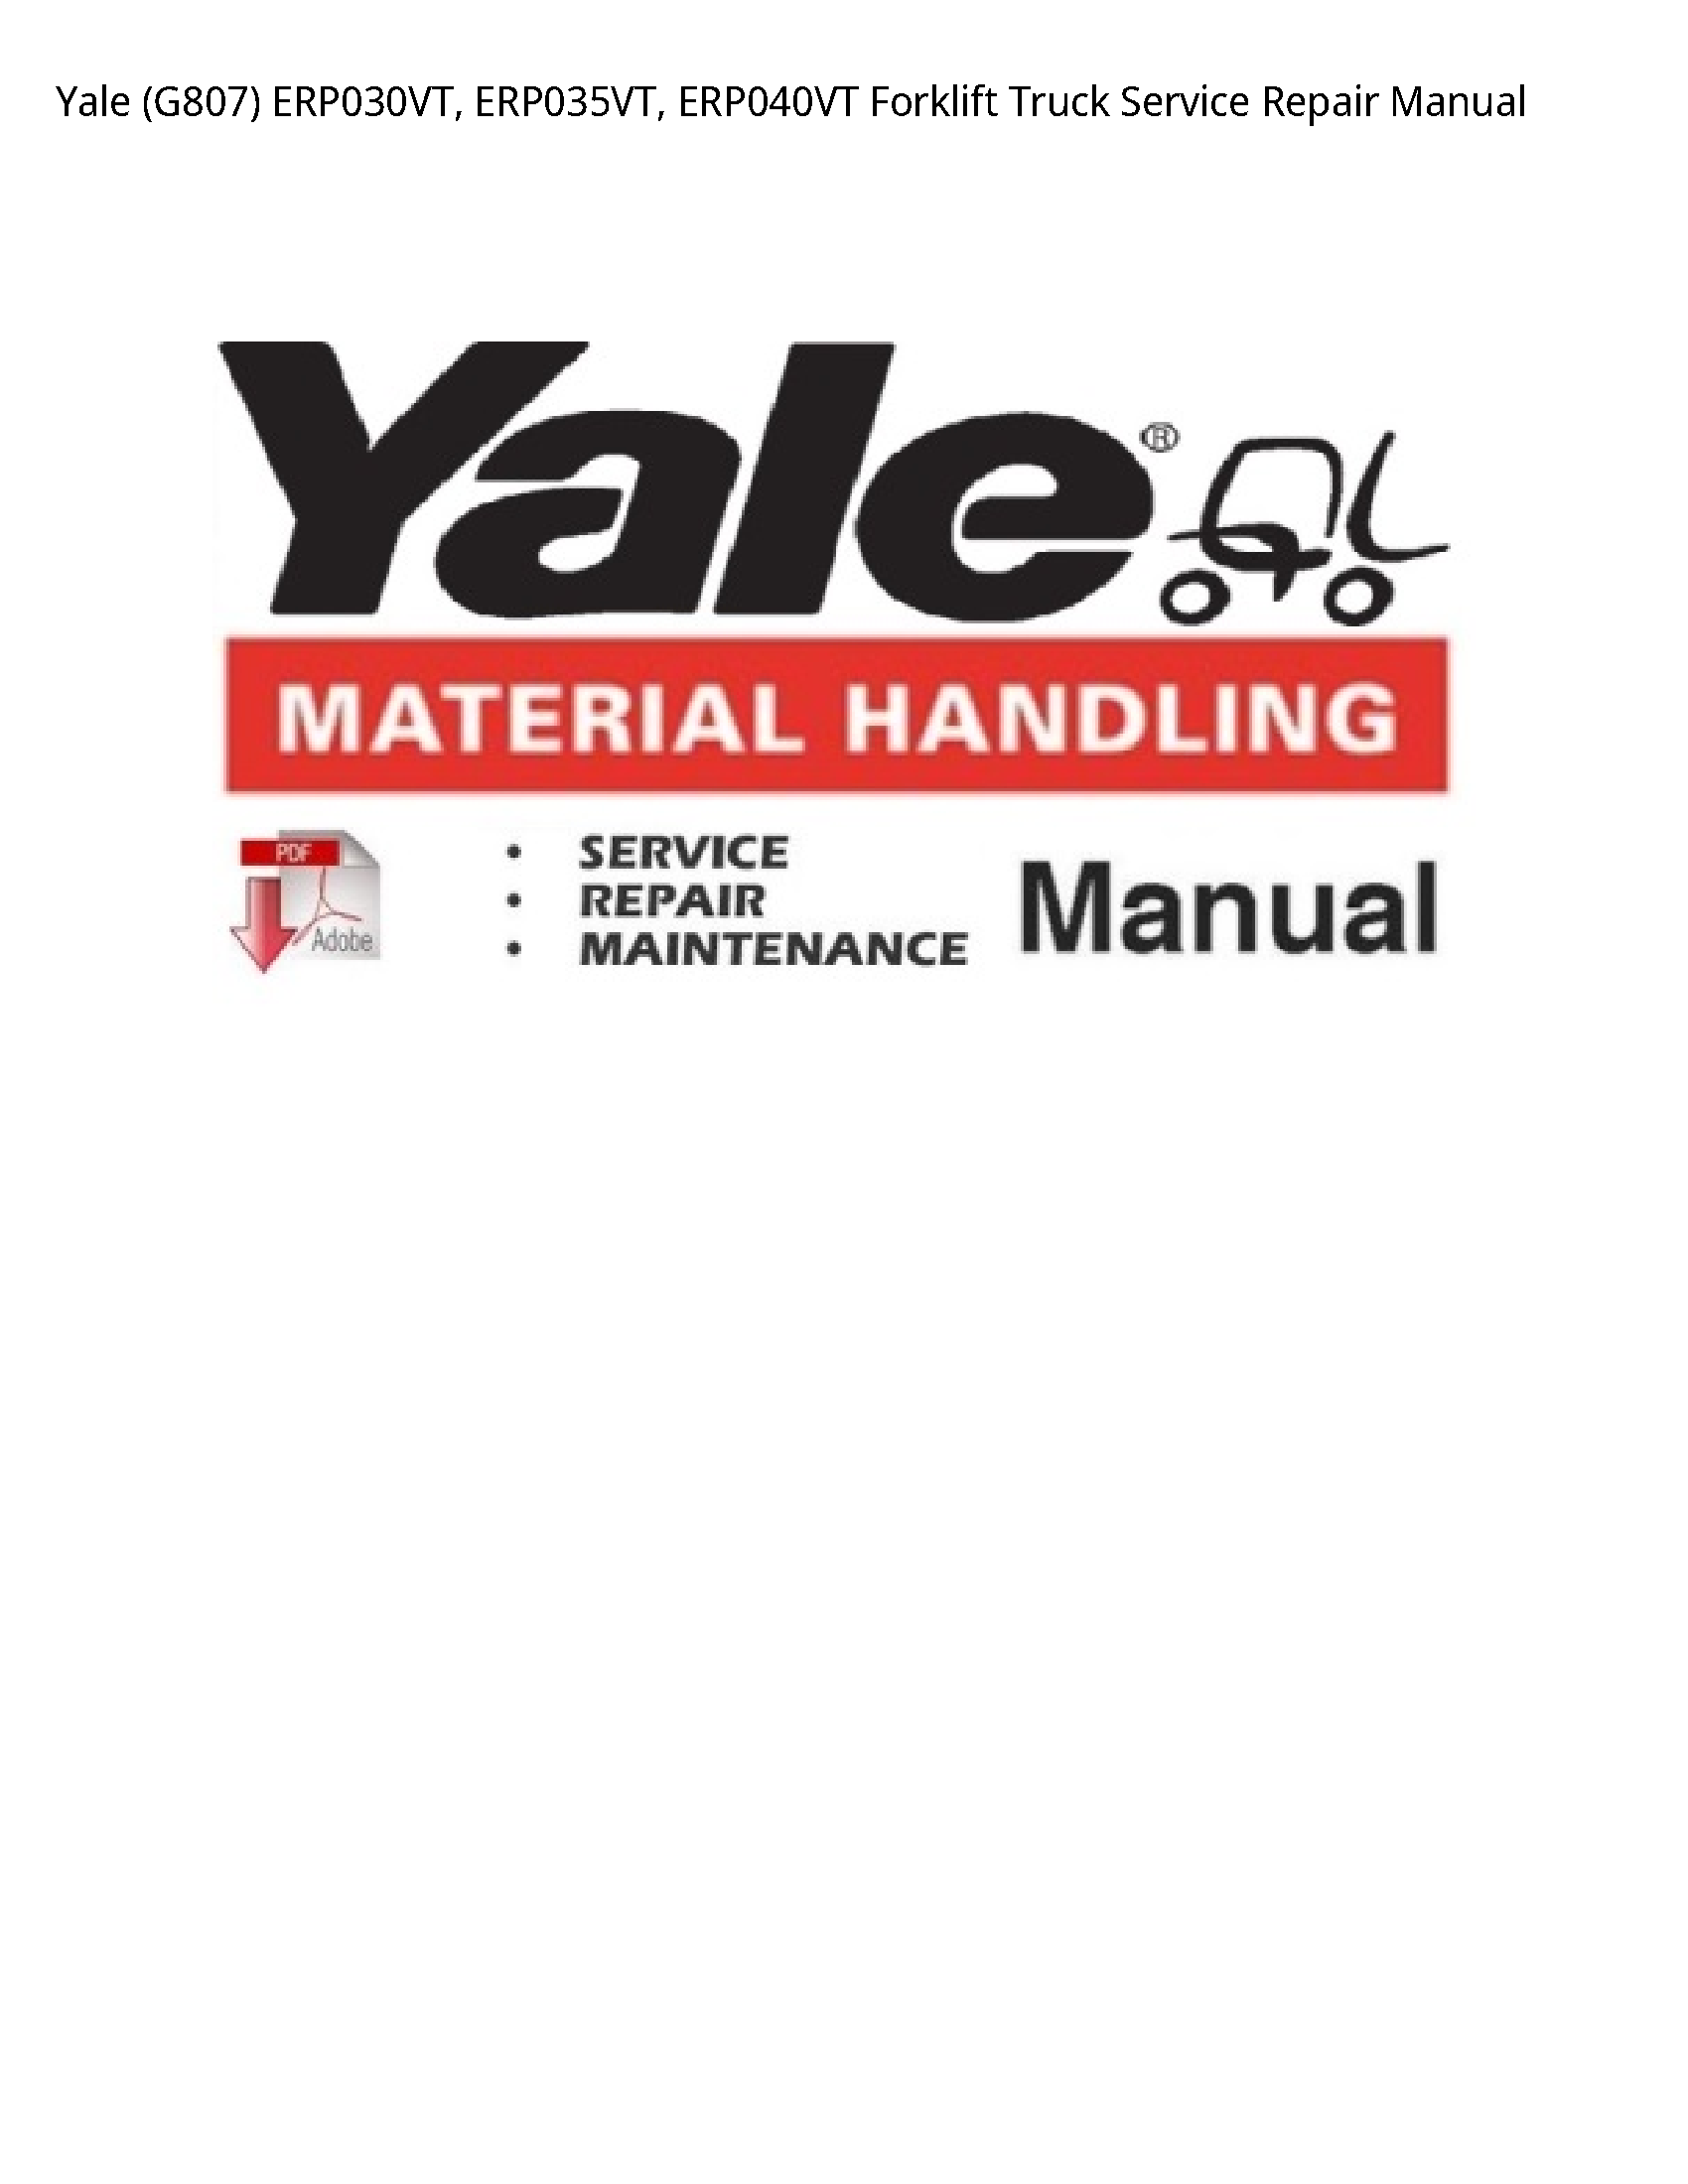 Yale (G807) Forklift Truck manual